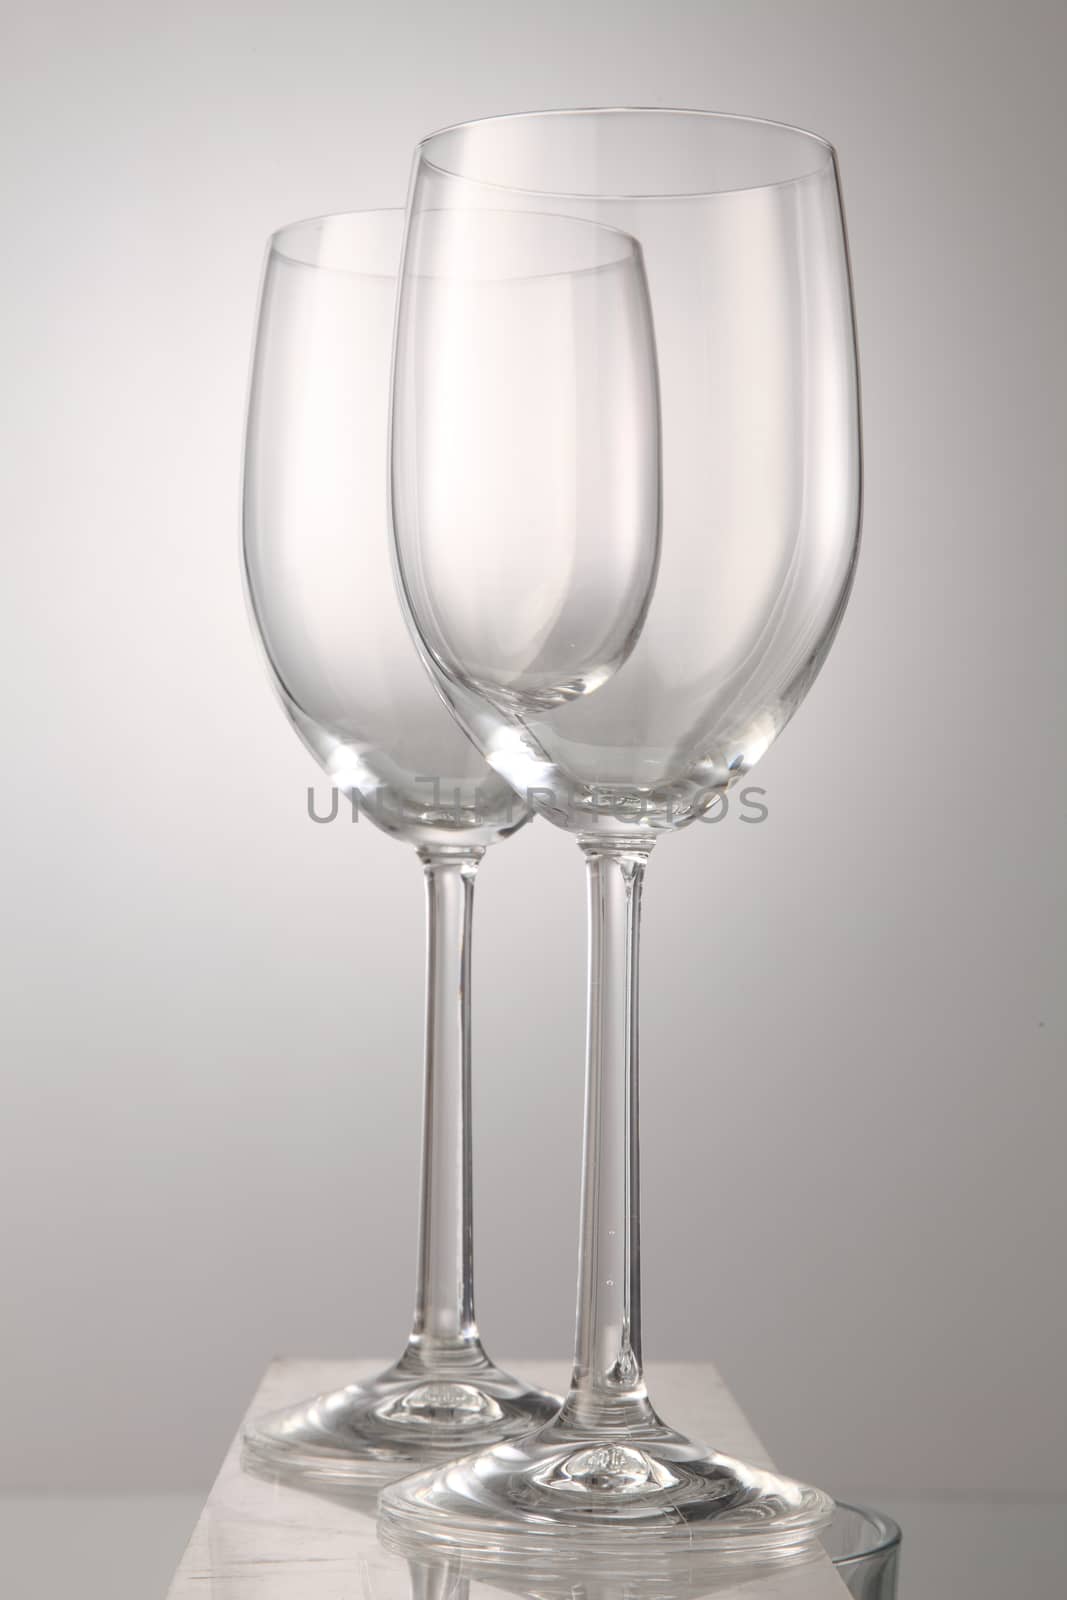 Two empty wine glass isolated on white